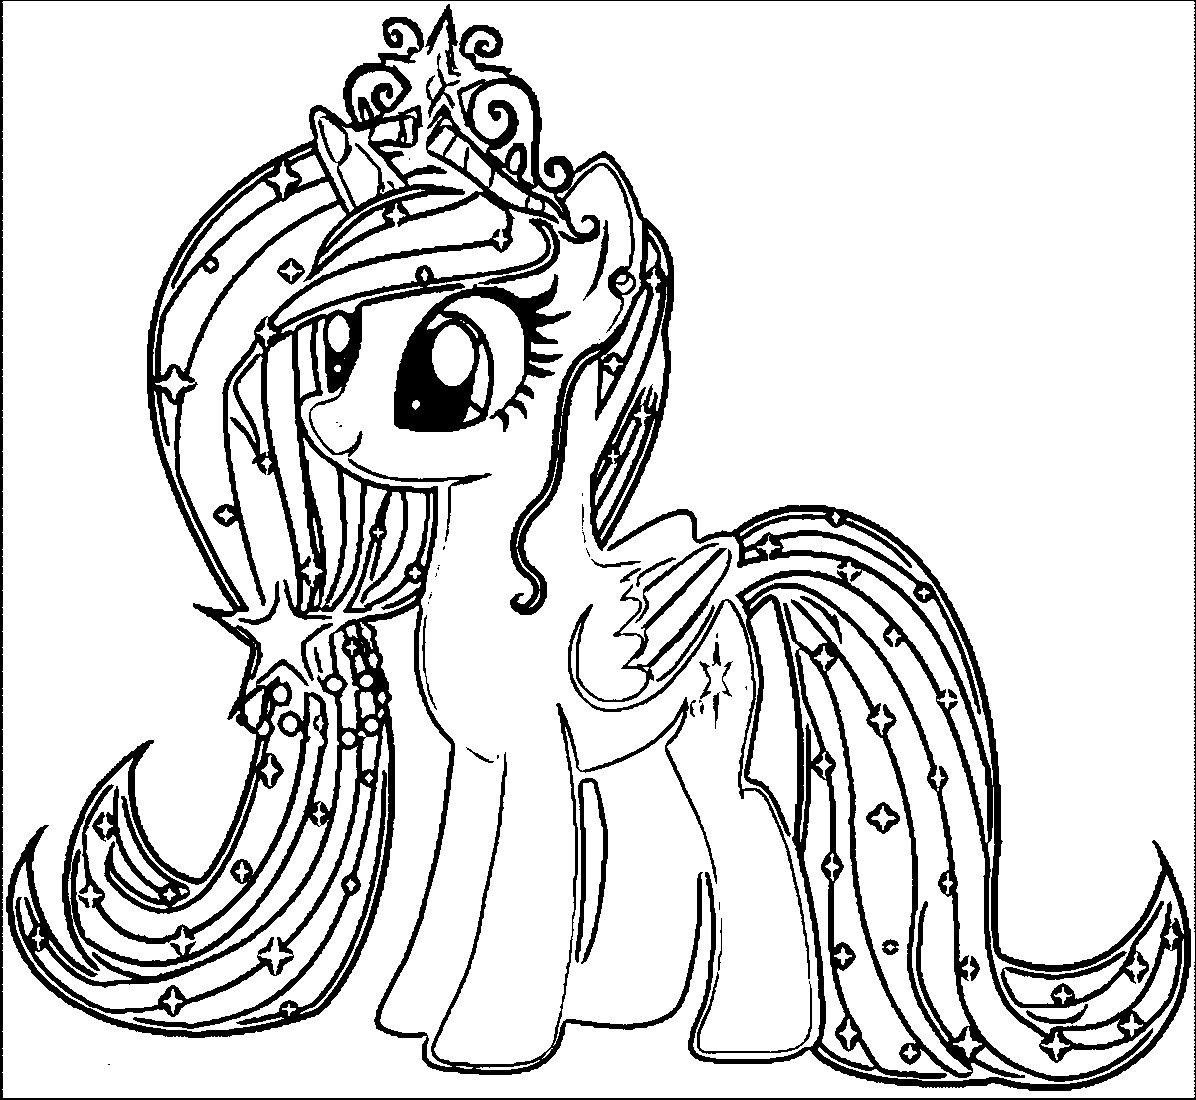 My Little Pony Coloring Pages Pdf | Educative Printable